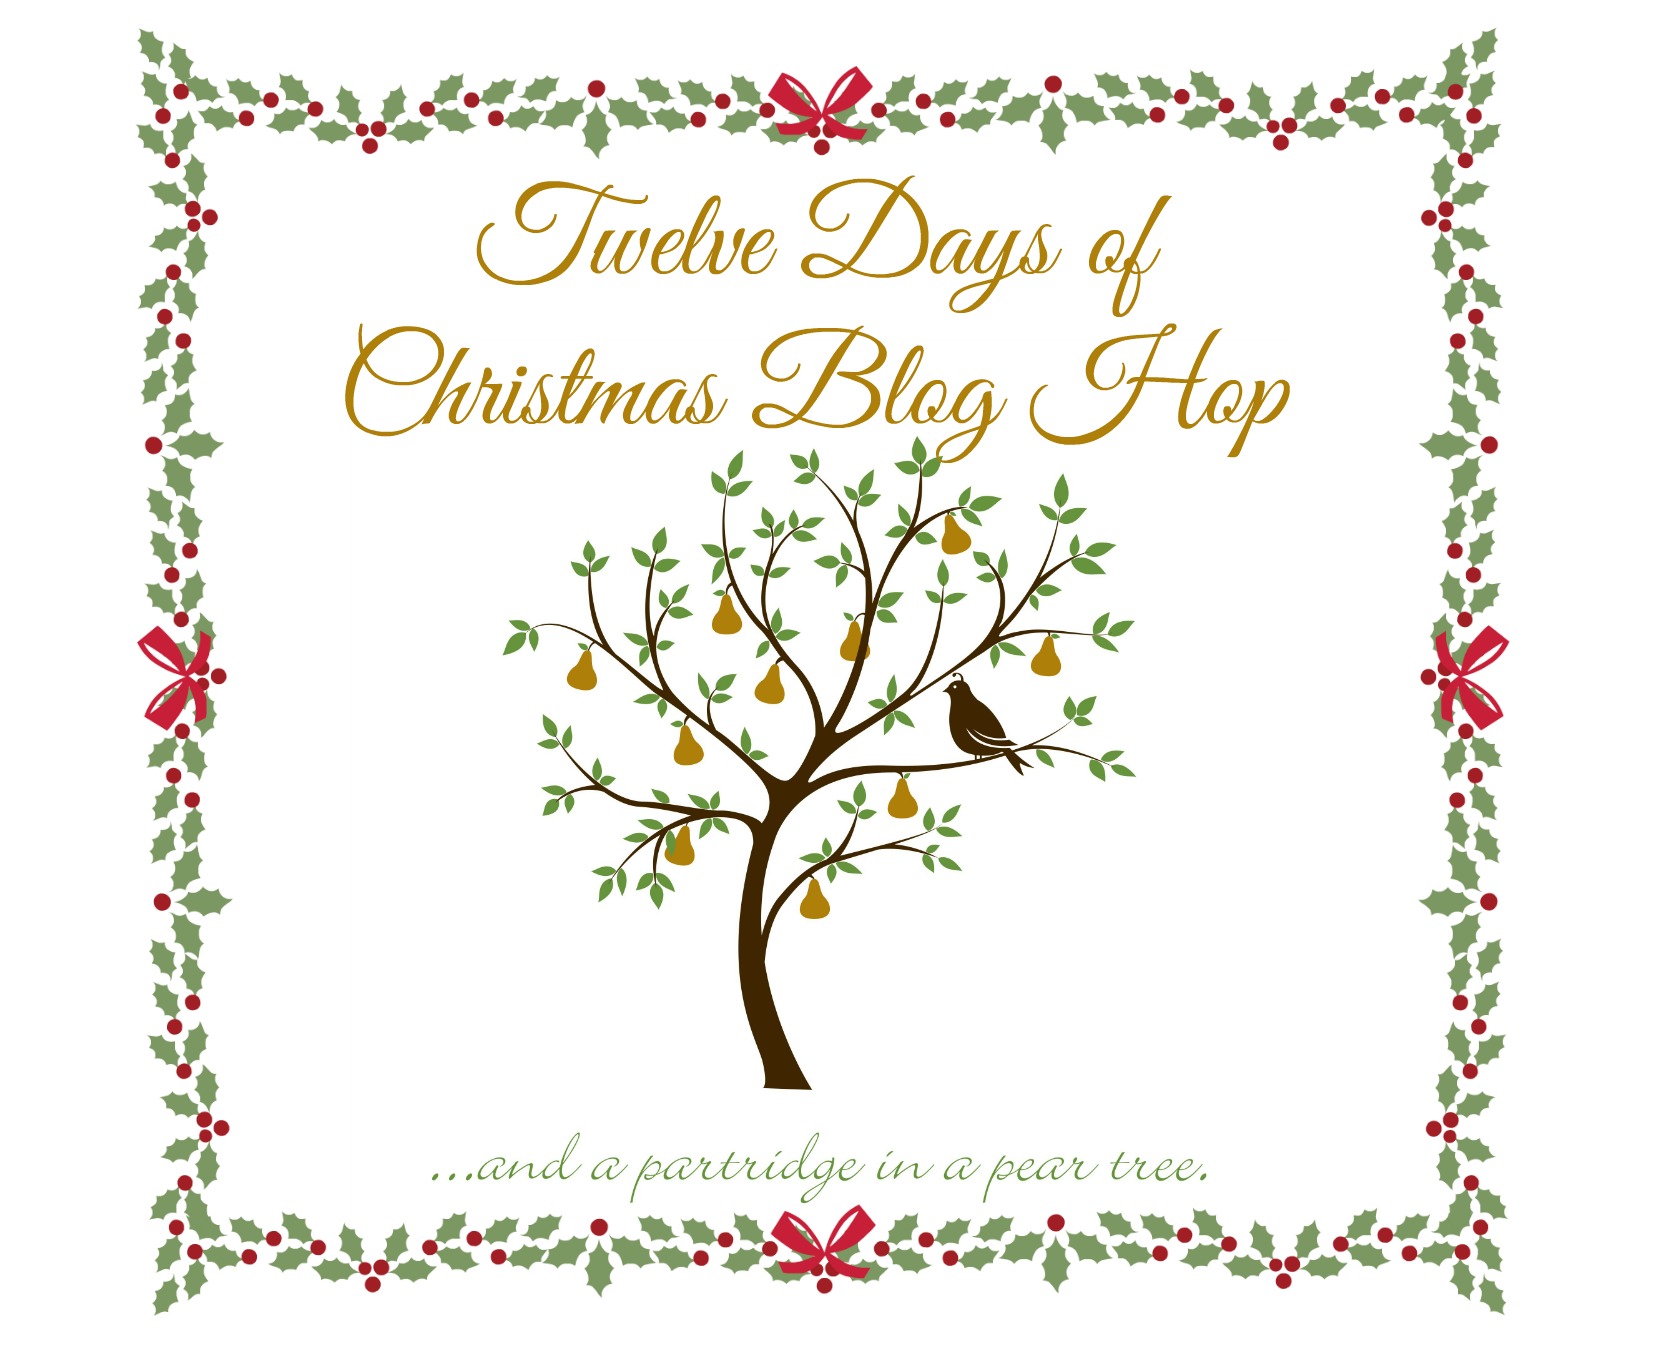 12 Days of Christmas Blog Hop: 15 Talented Bloggers are getting together to share some inspiring Christmas Creations! Check out these DIY projects, Recipes, and Gift Ideas!!! #12DaysOfChristmasBlogHop 